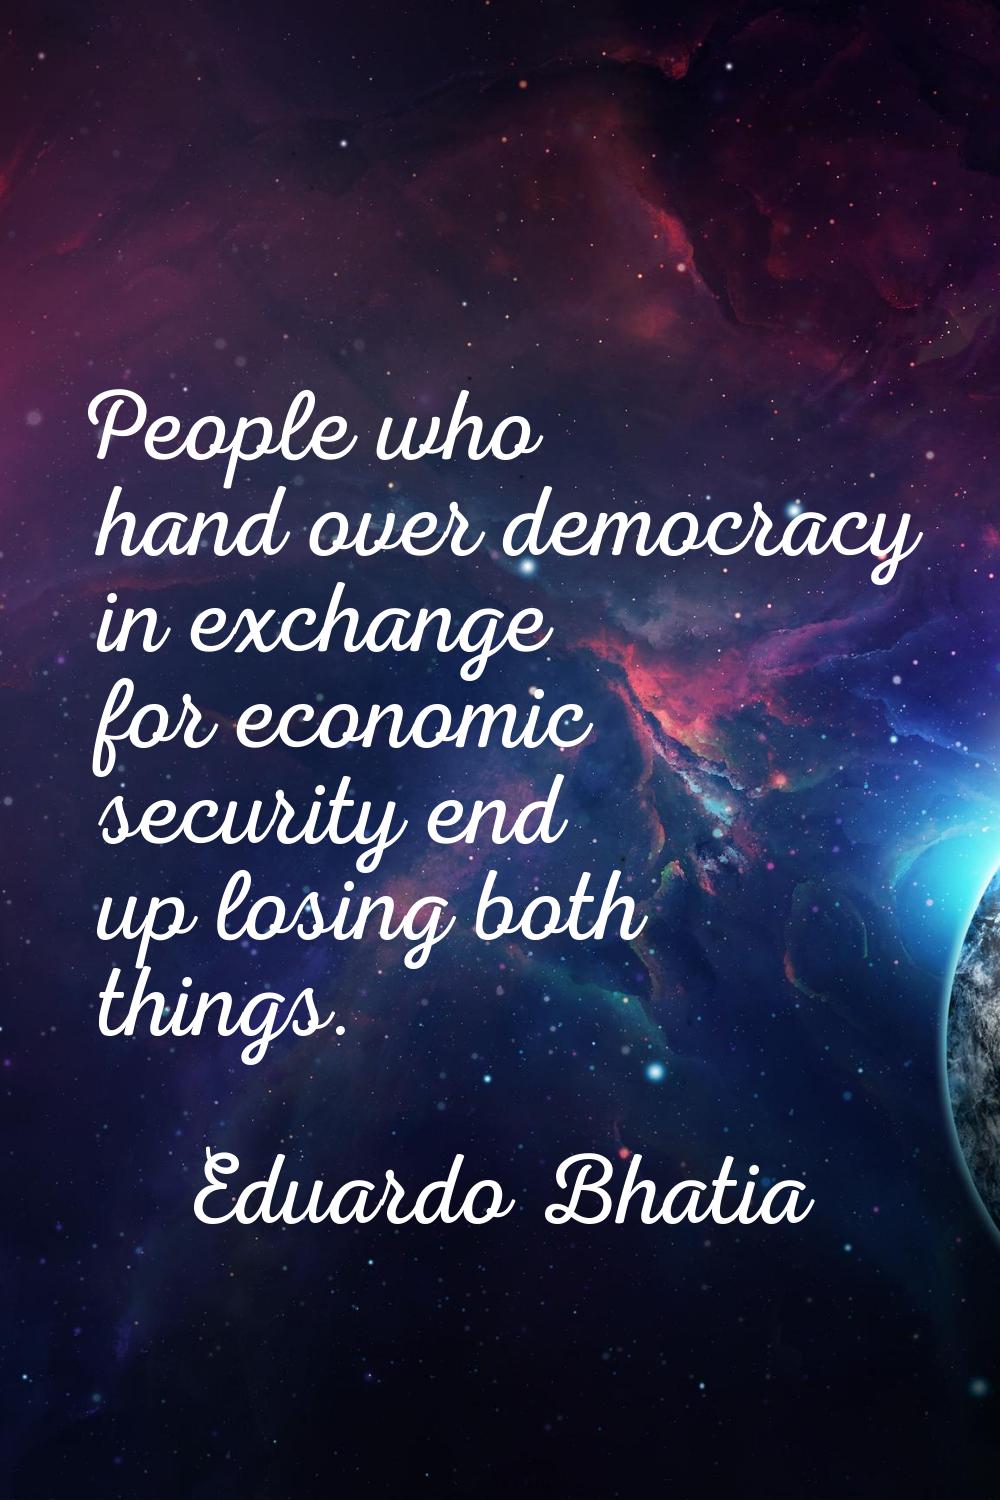 People who hand over democracy in exchange for economic security end up losing both things.